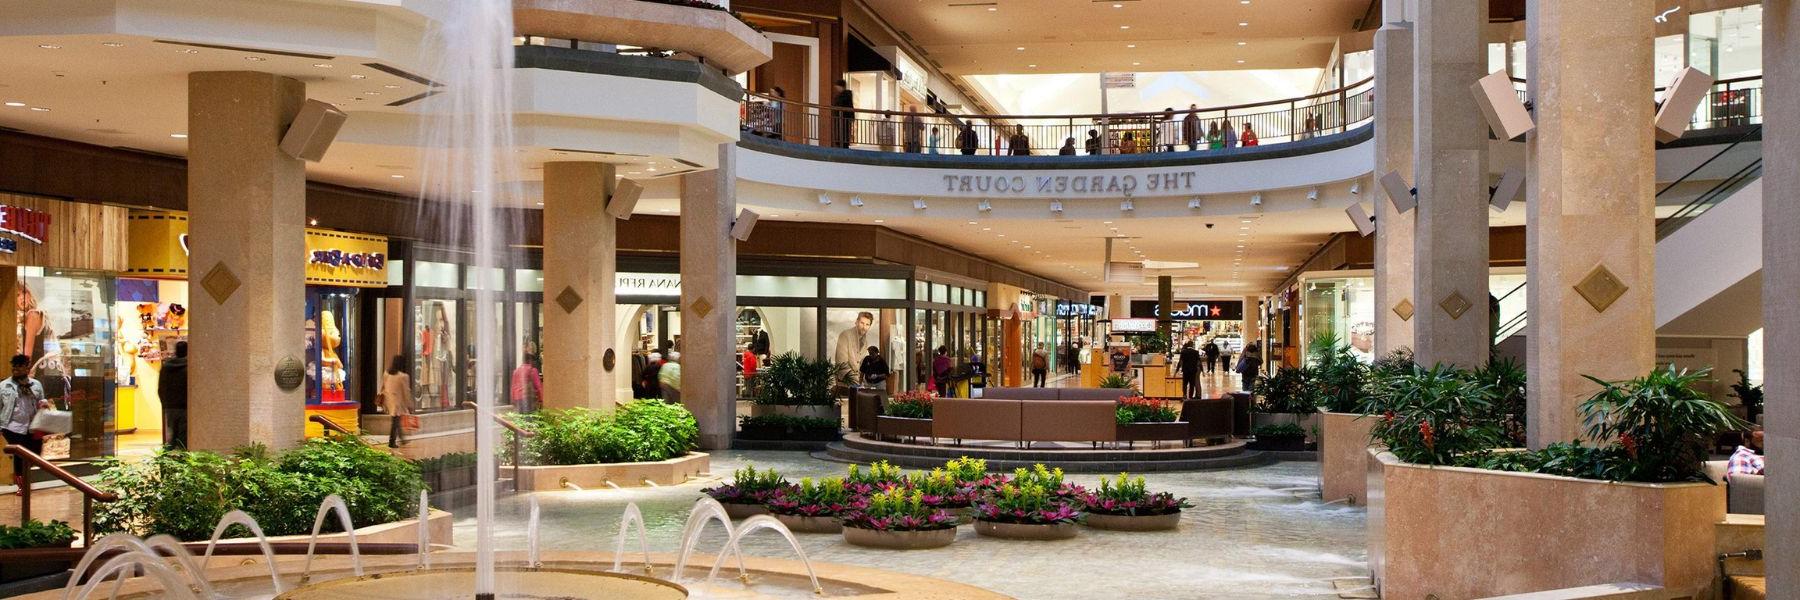 Saint Louis Galleria is one of the best shopping centers in the region.